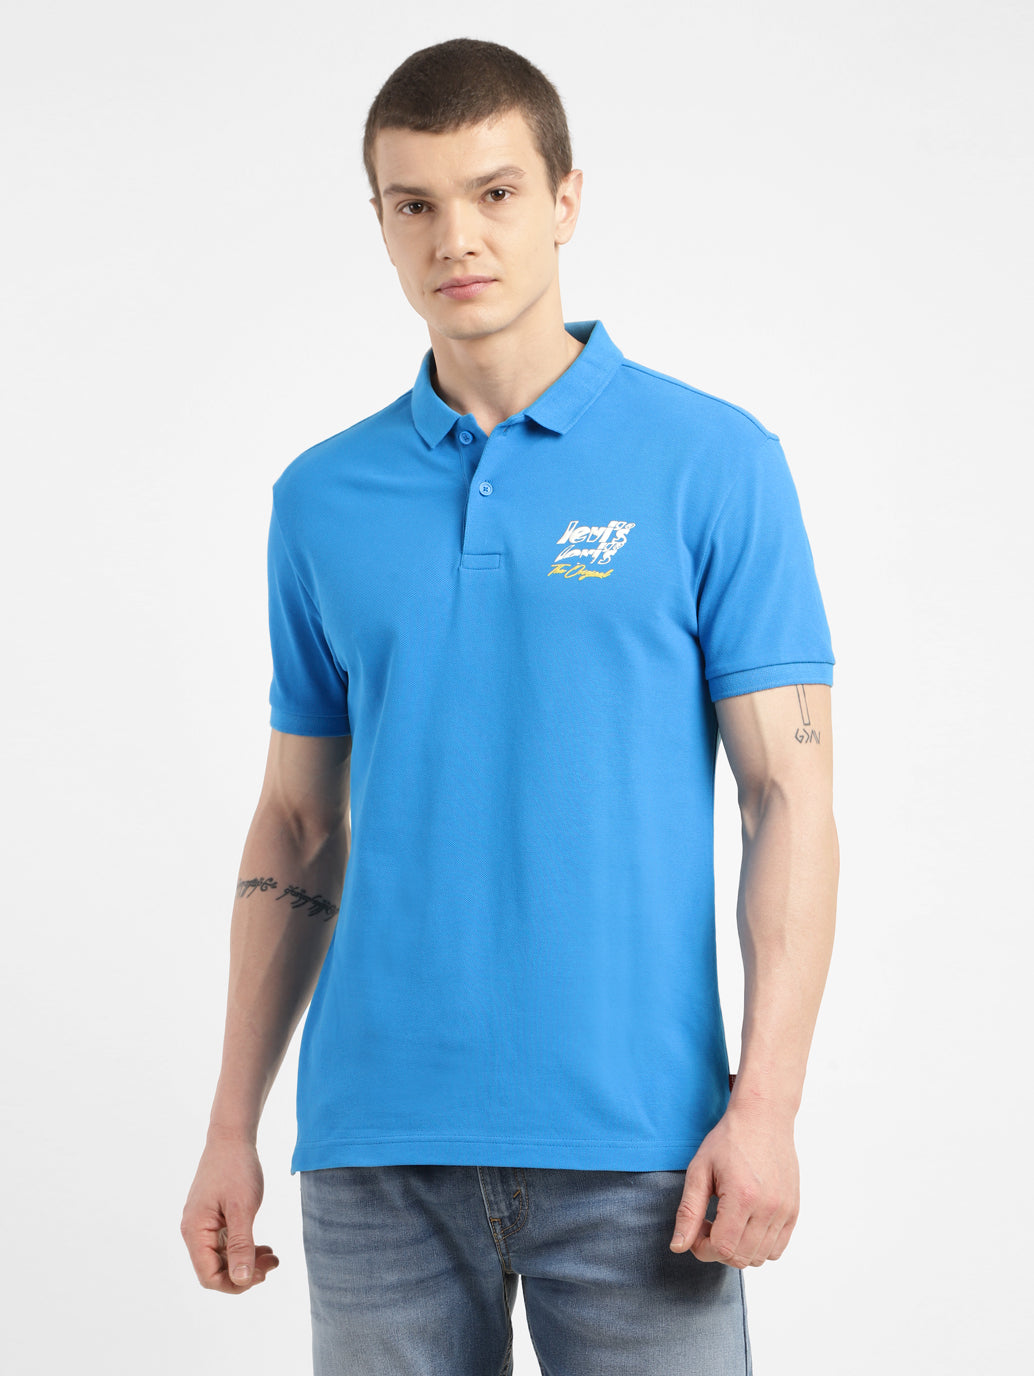 LACOSTE MENS SHIRTS- with typical characteristics of the brand